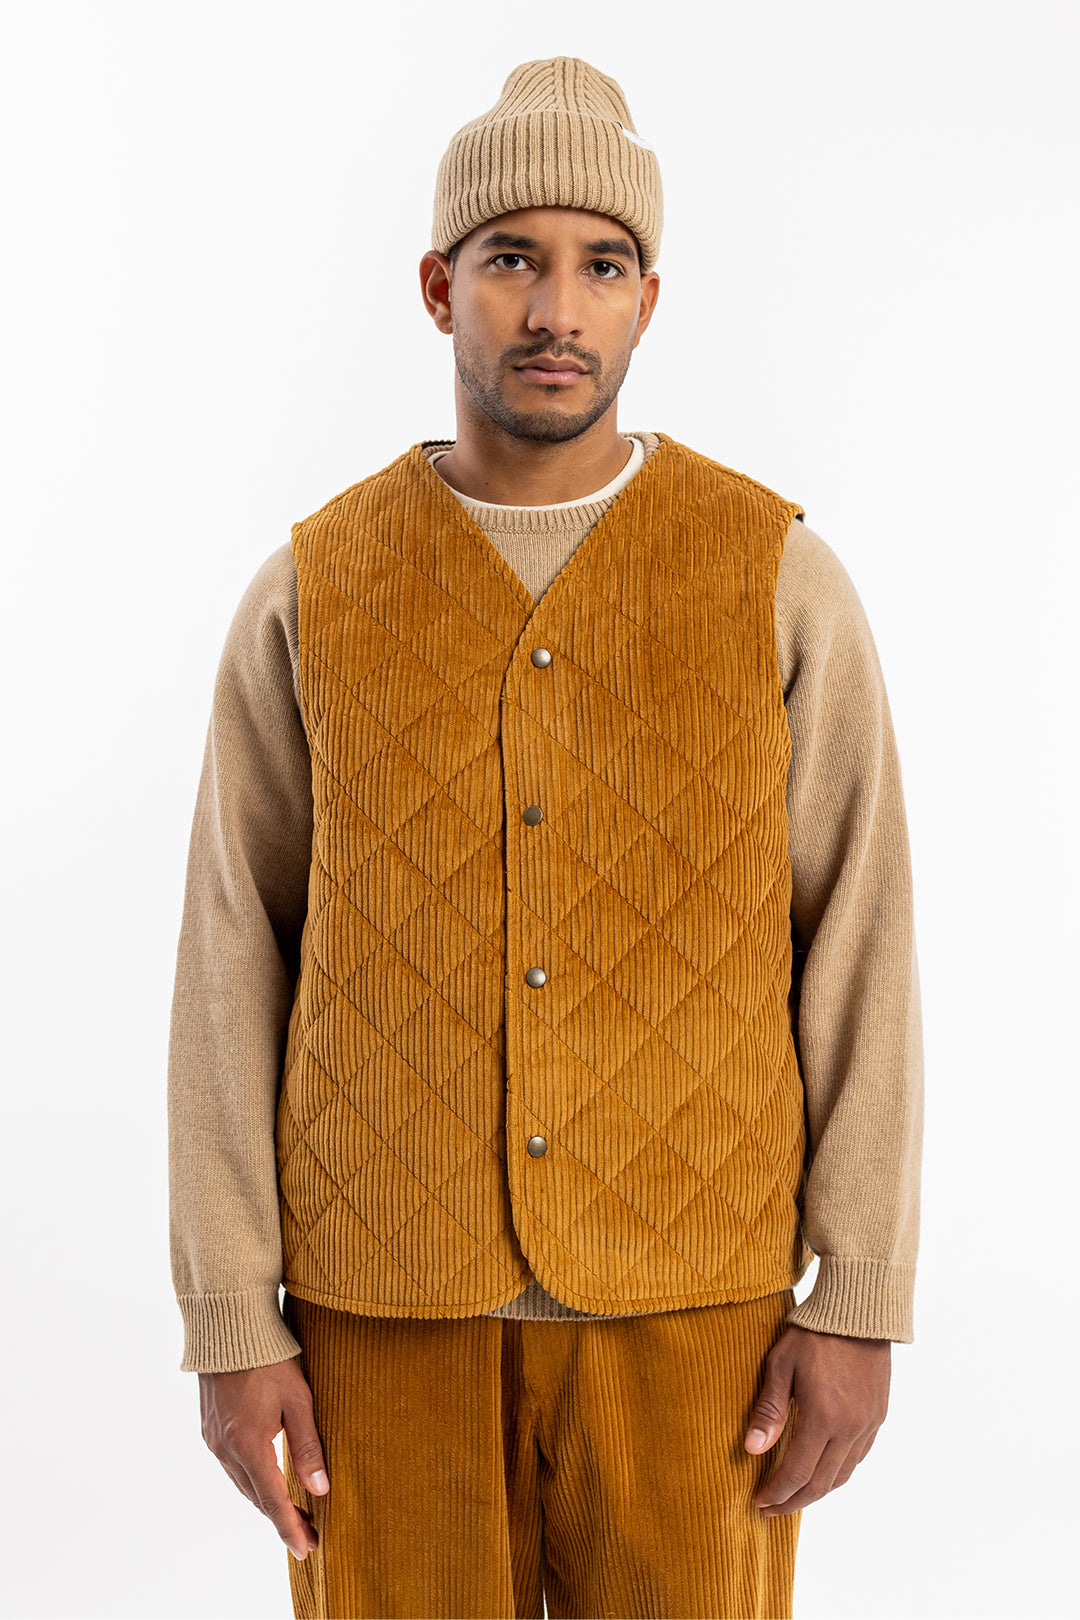 Toffee, quilted men's corduroy vest made of organic cotton &amp; recycled PET from Rotholz